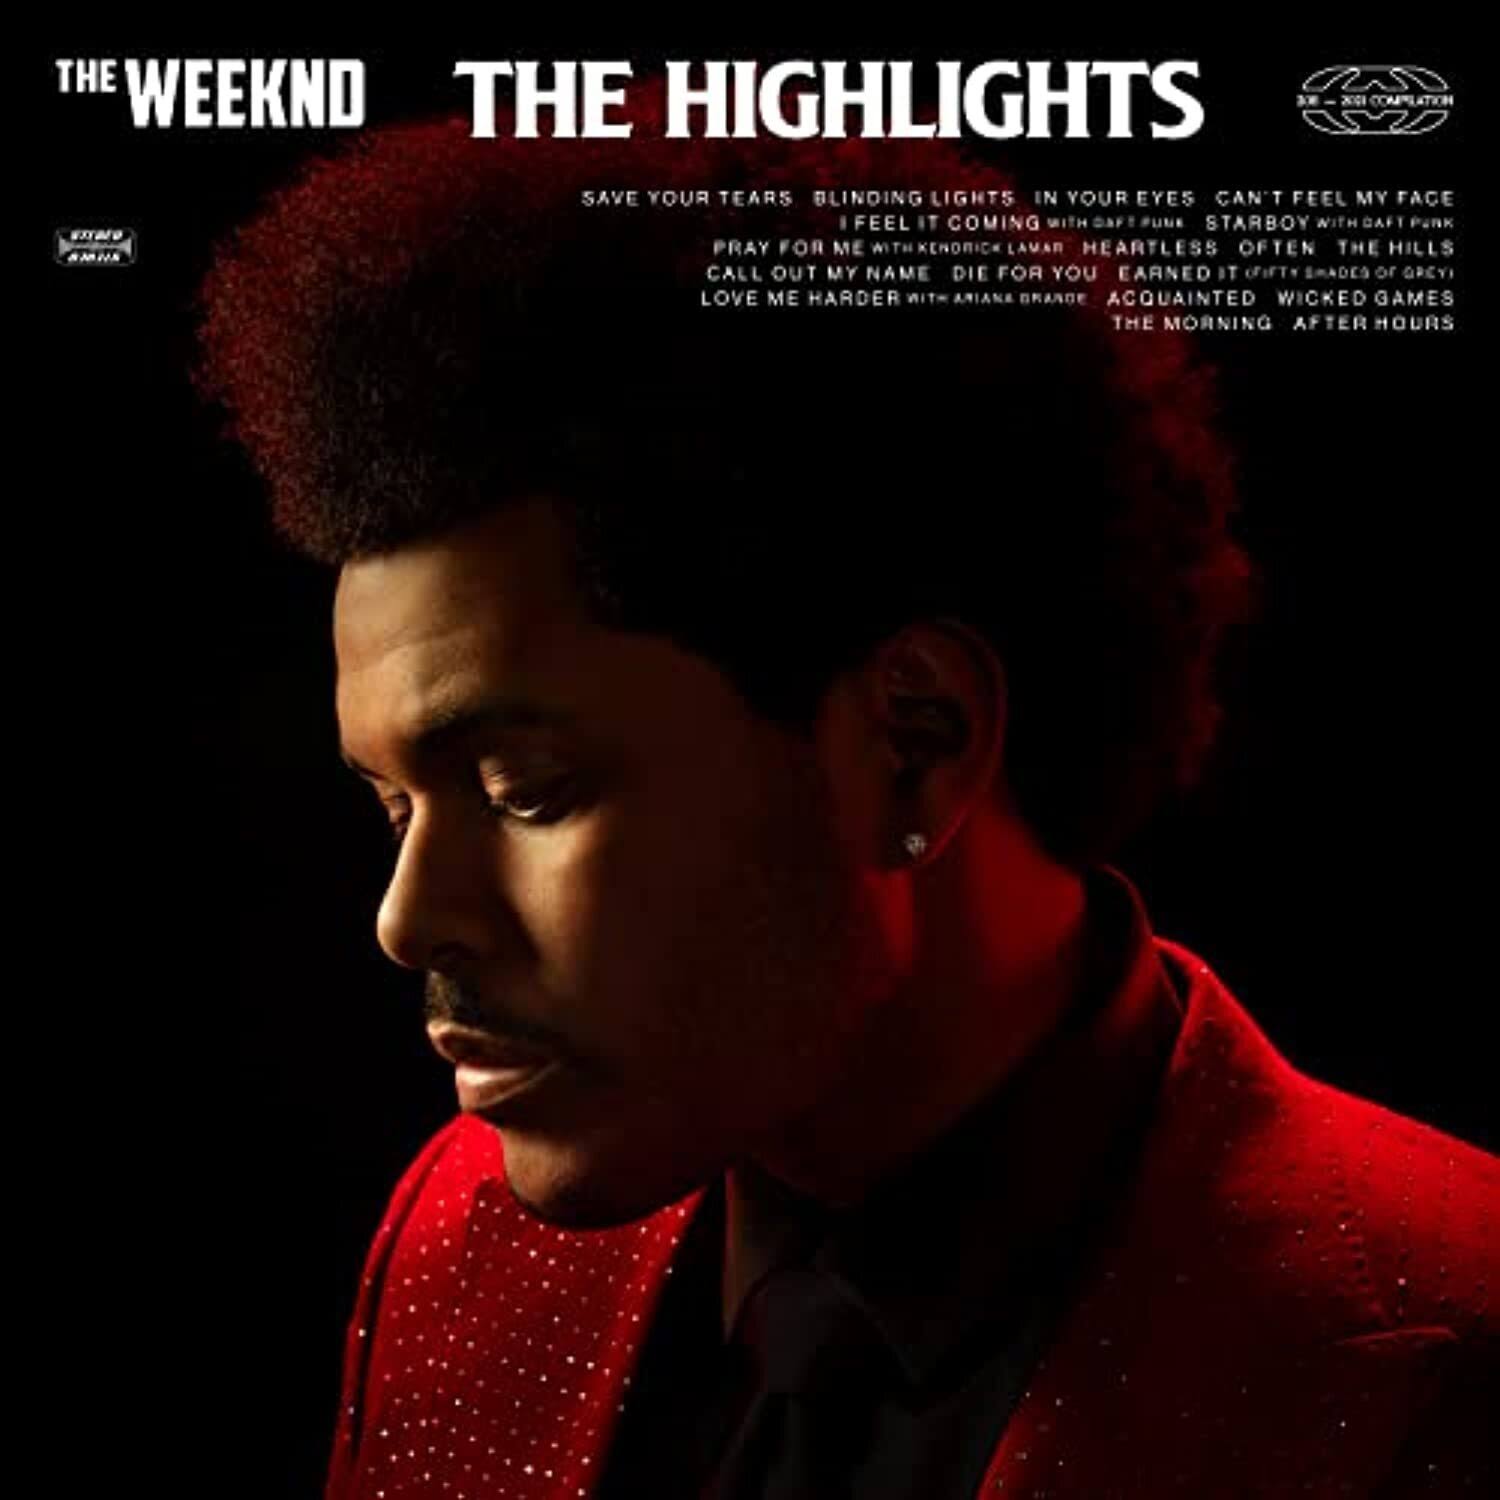 The Highlights - The Weeknd [VINYL]